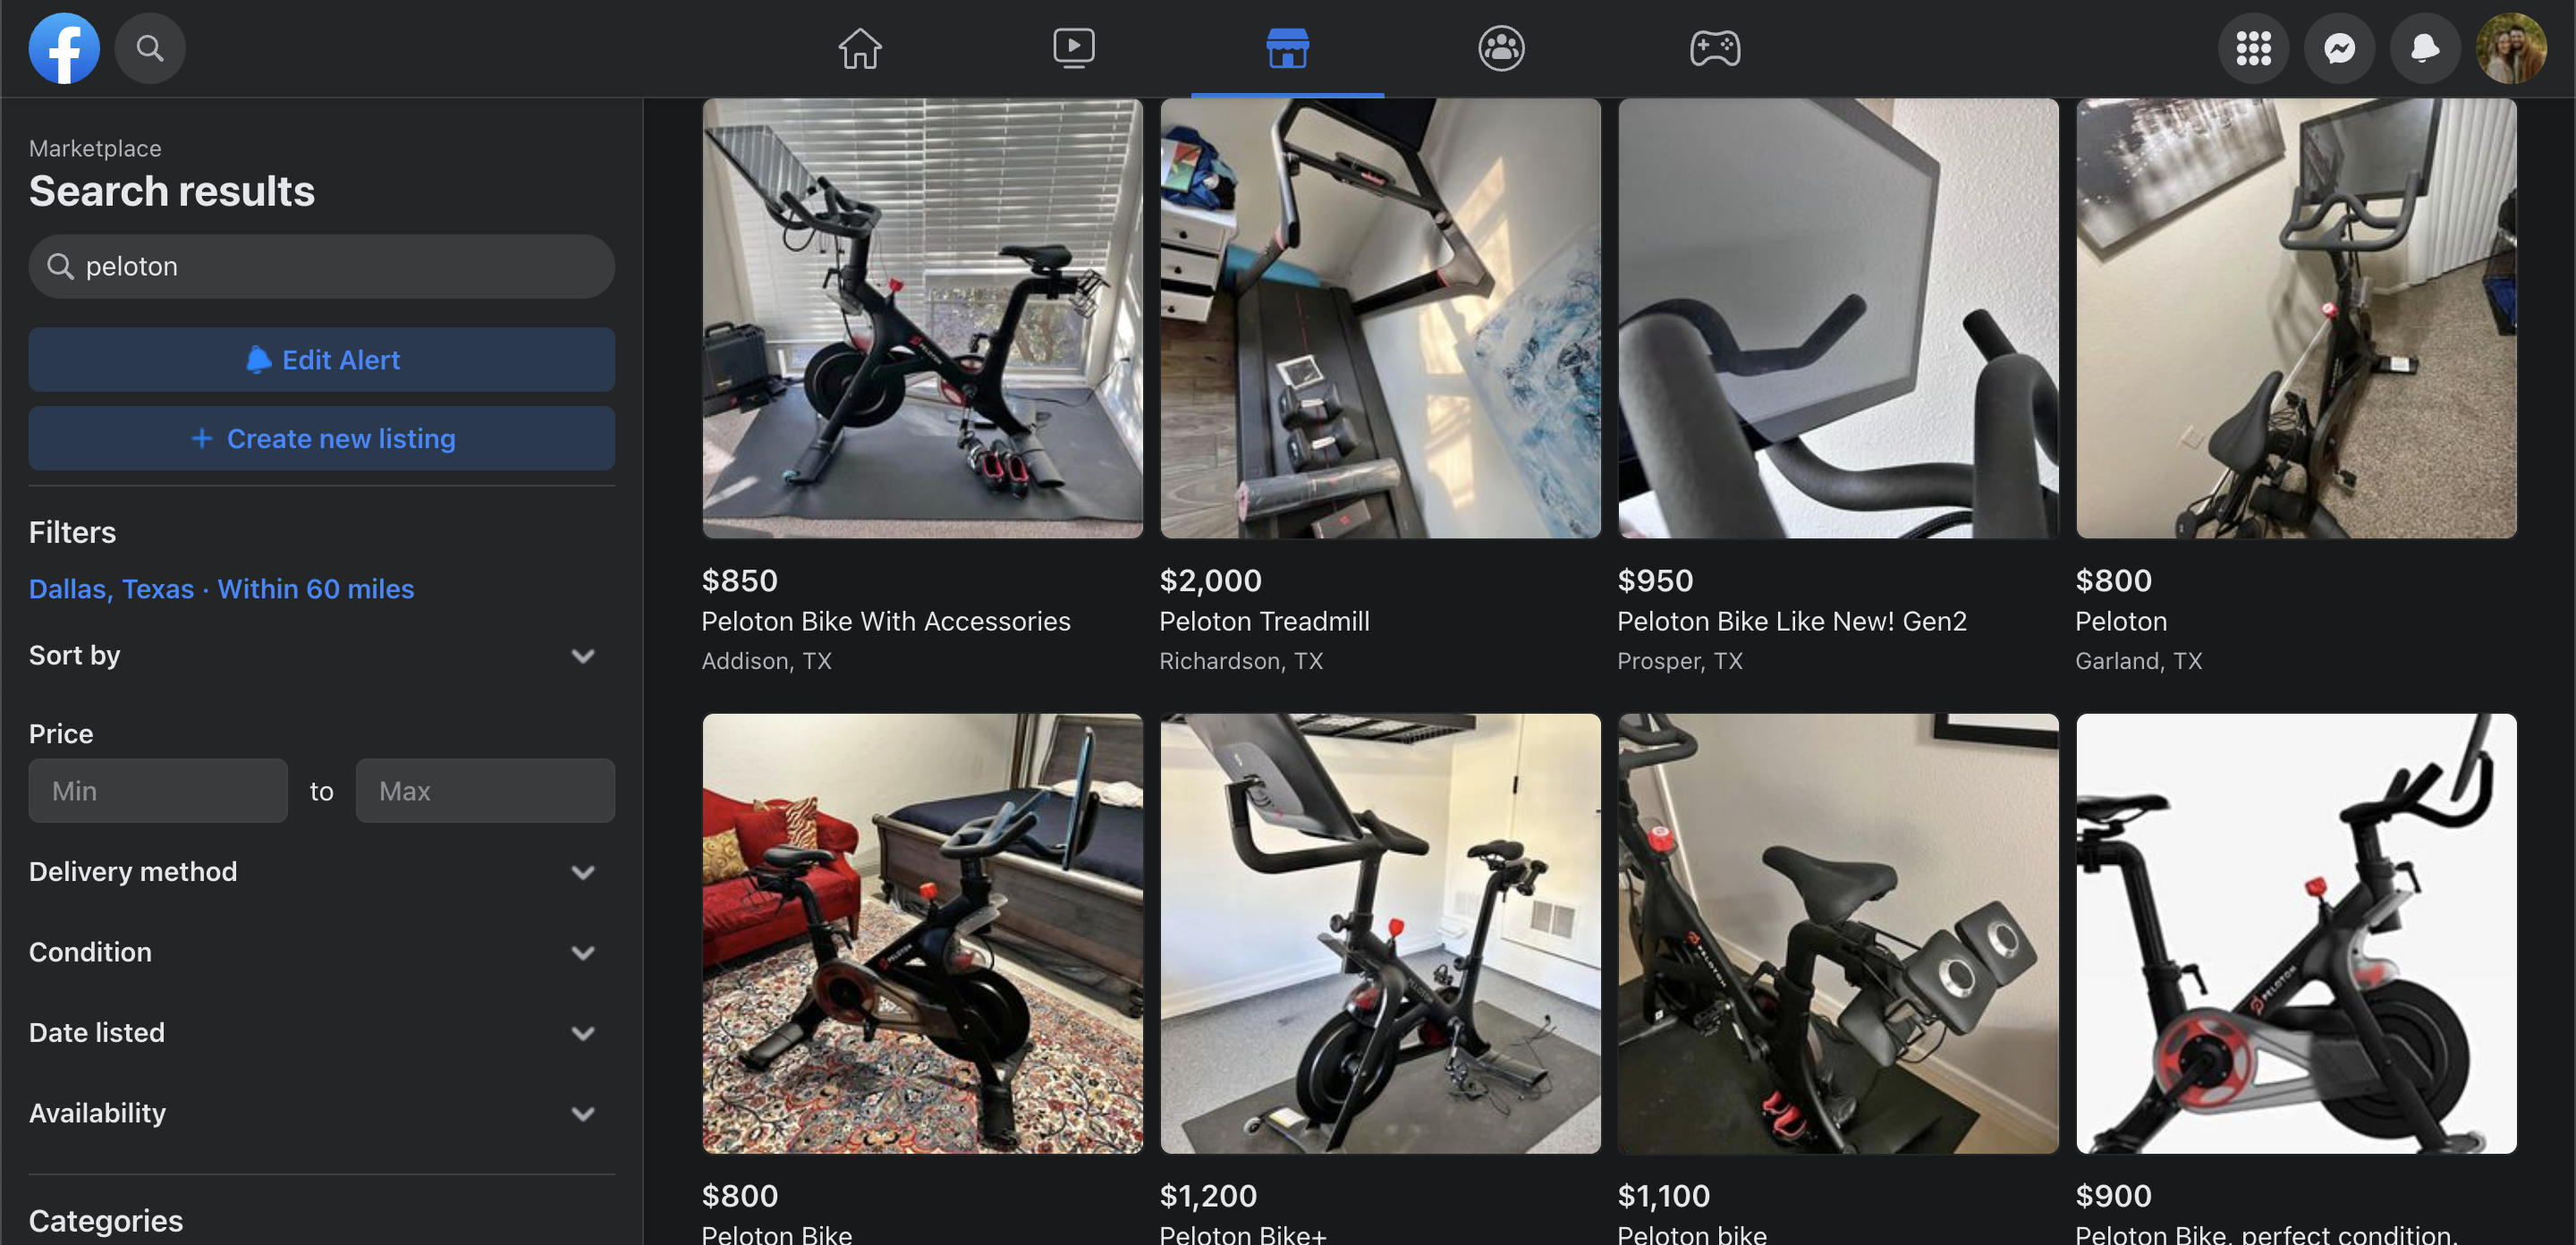 Screenshot of Facebook MarketPlace listings for used Pelotons. They range in price from $800 to $1200.